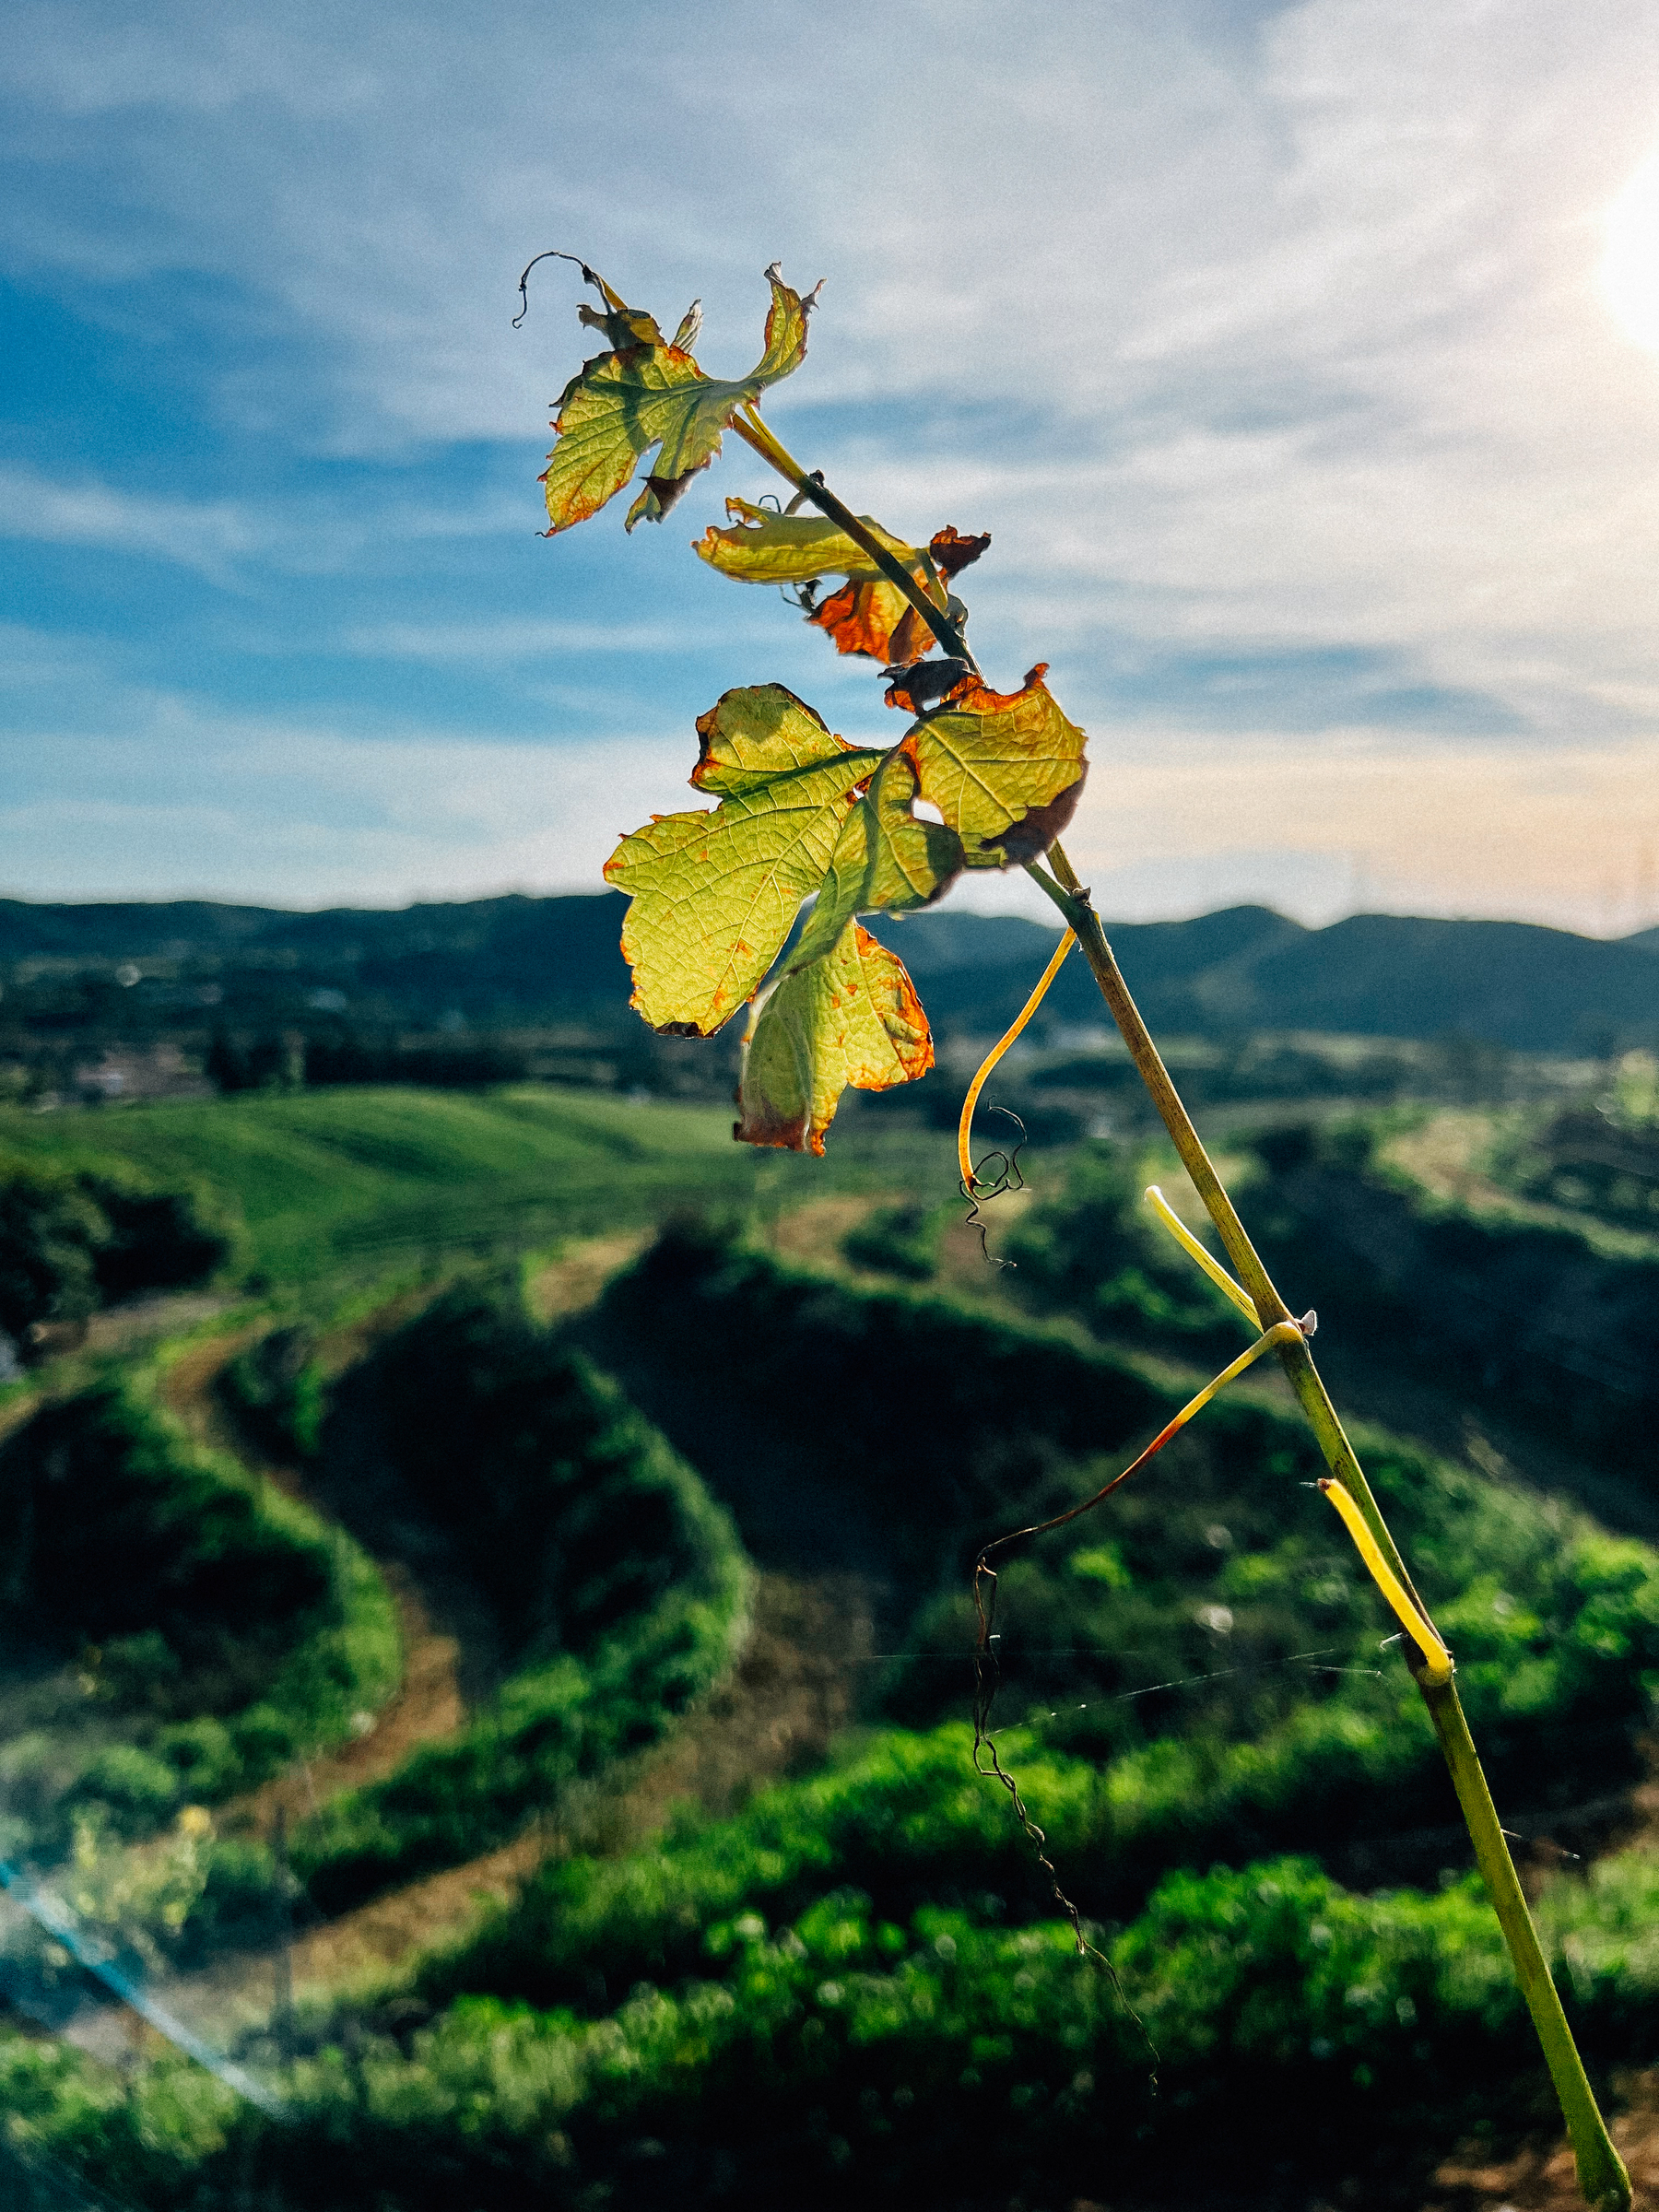 A sunlit close-up of grapevine leaves against a blurred background of rolling vineyard hills.